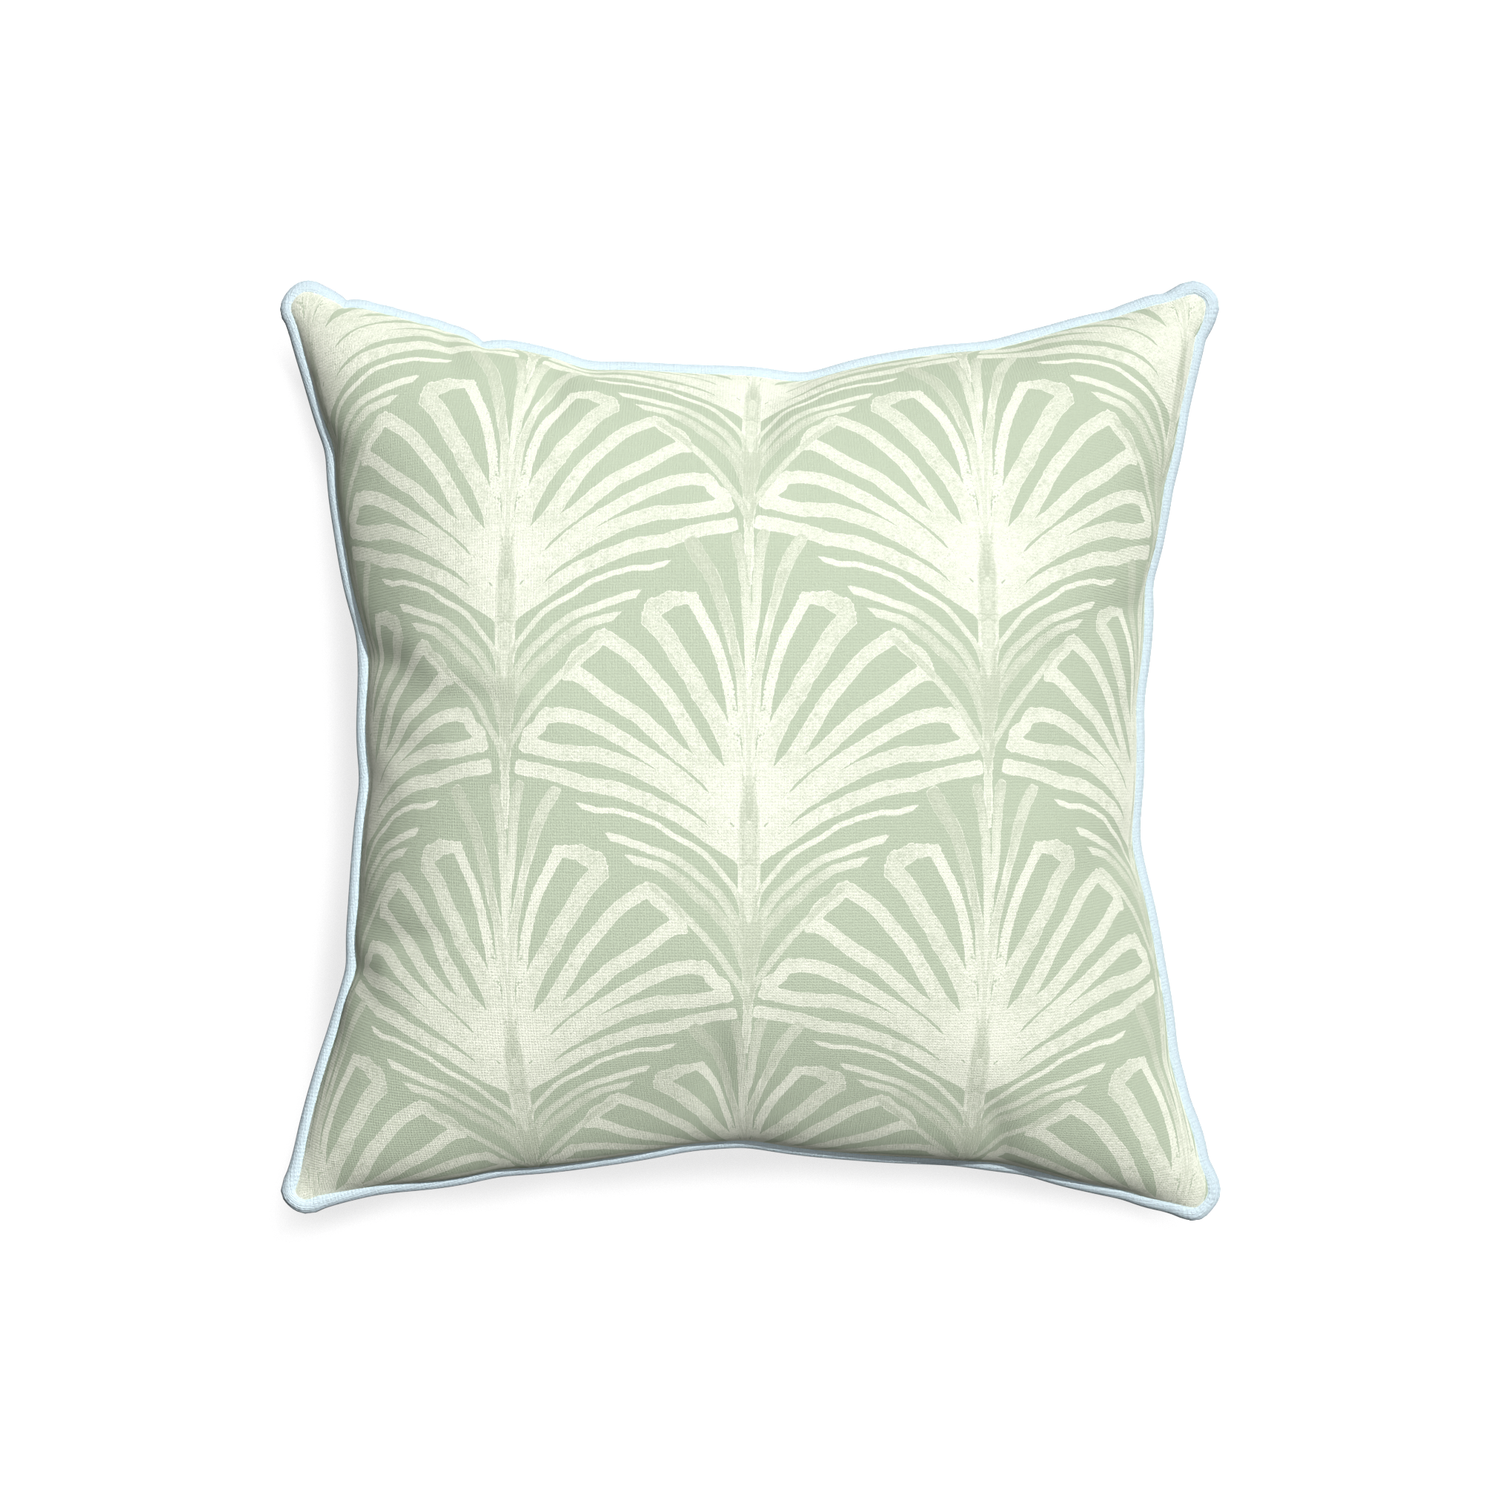 20-square suzy sage custom pillow with powder piping on white background